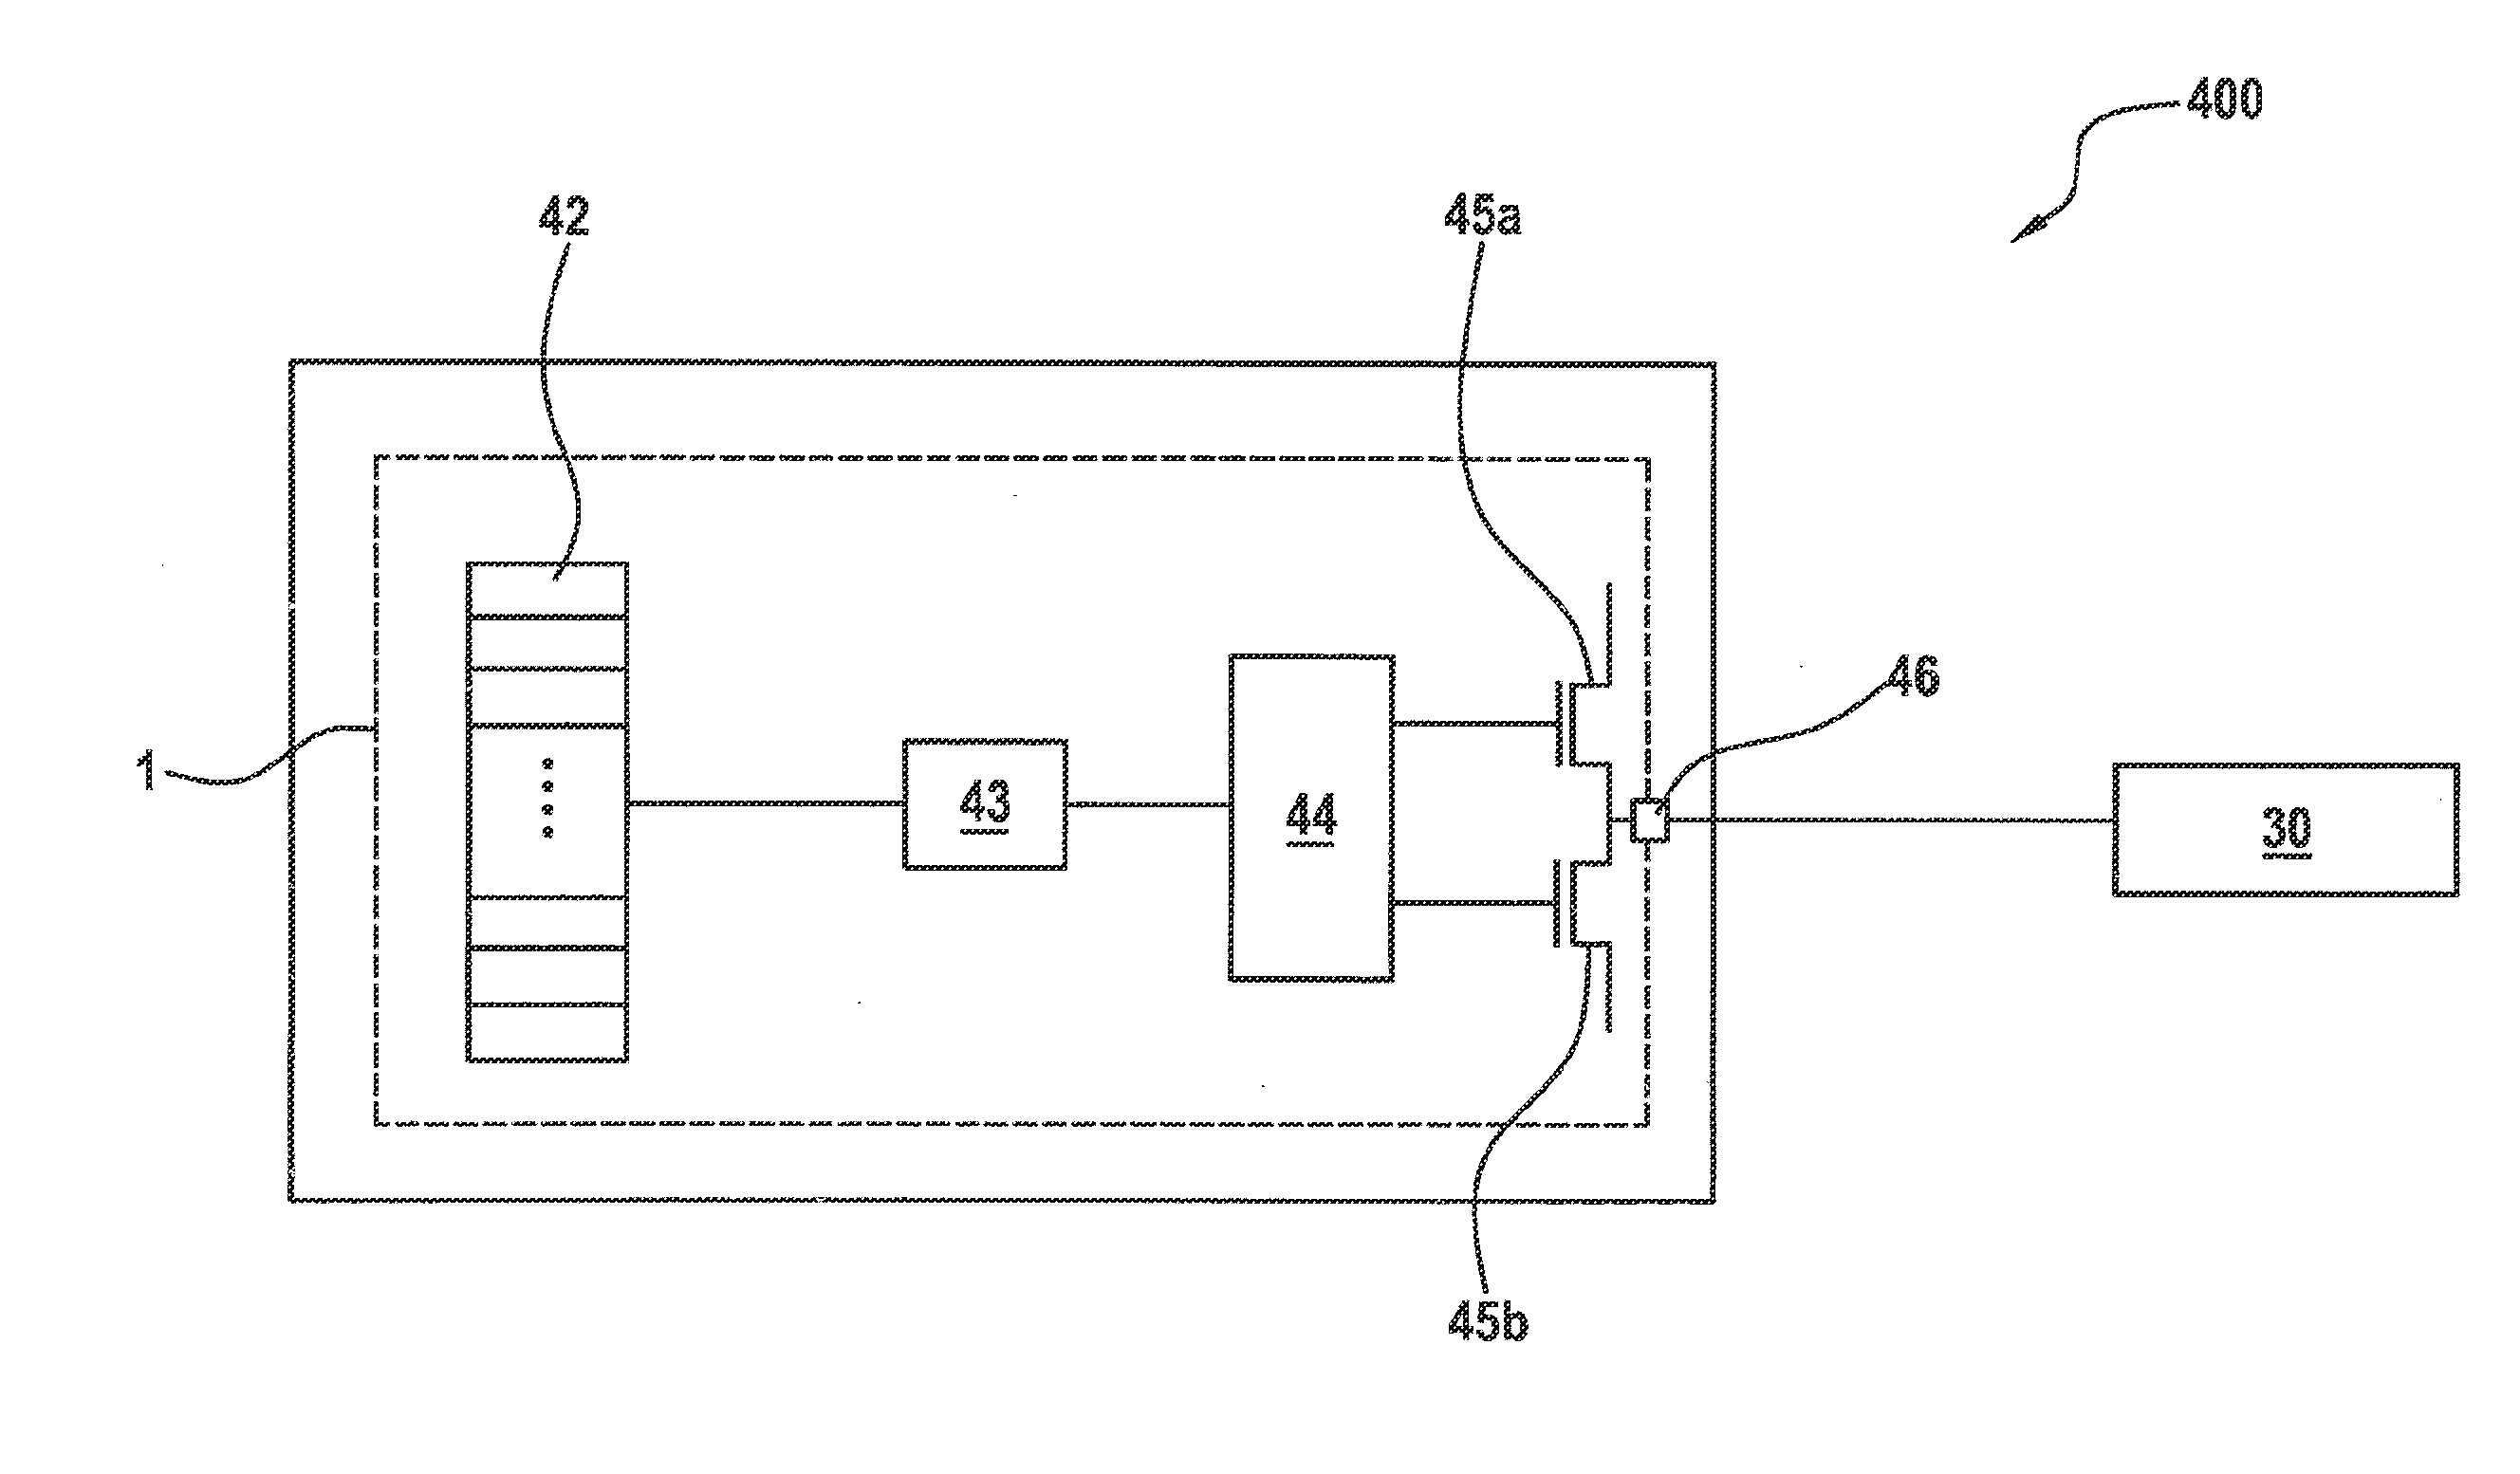 Digital control for a microelectromechanical element